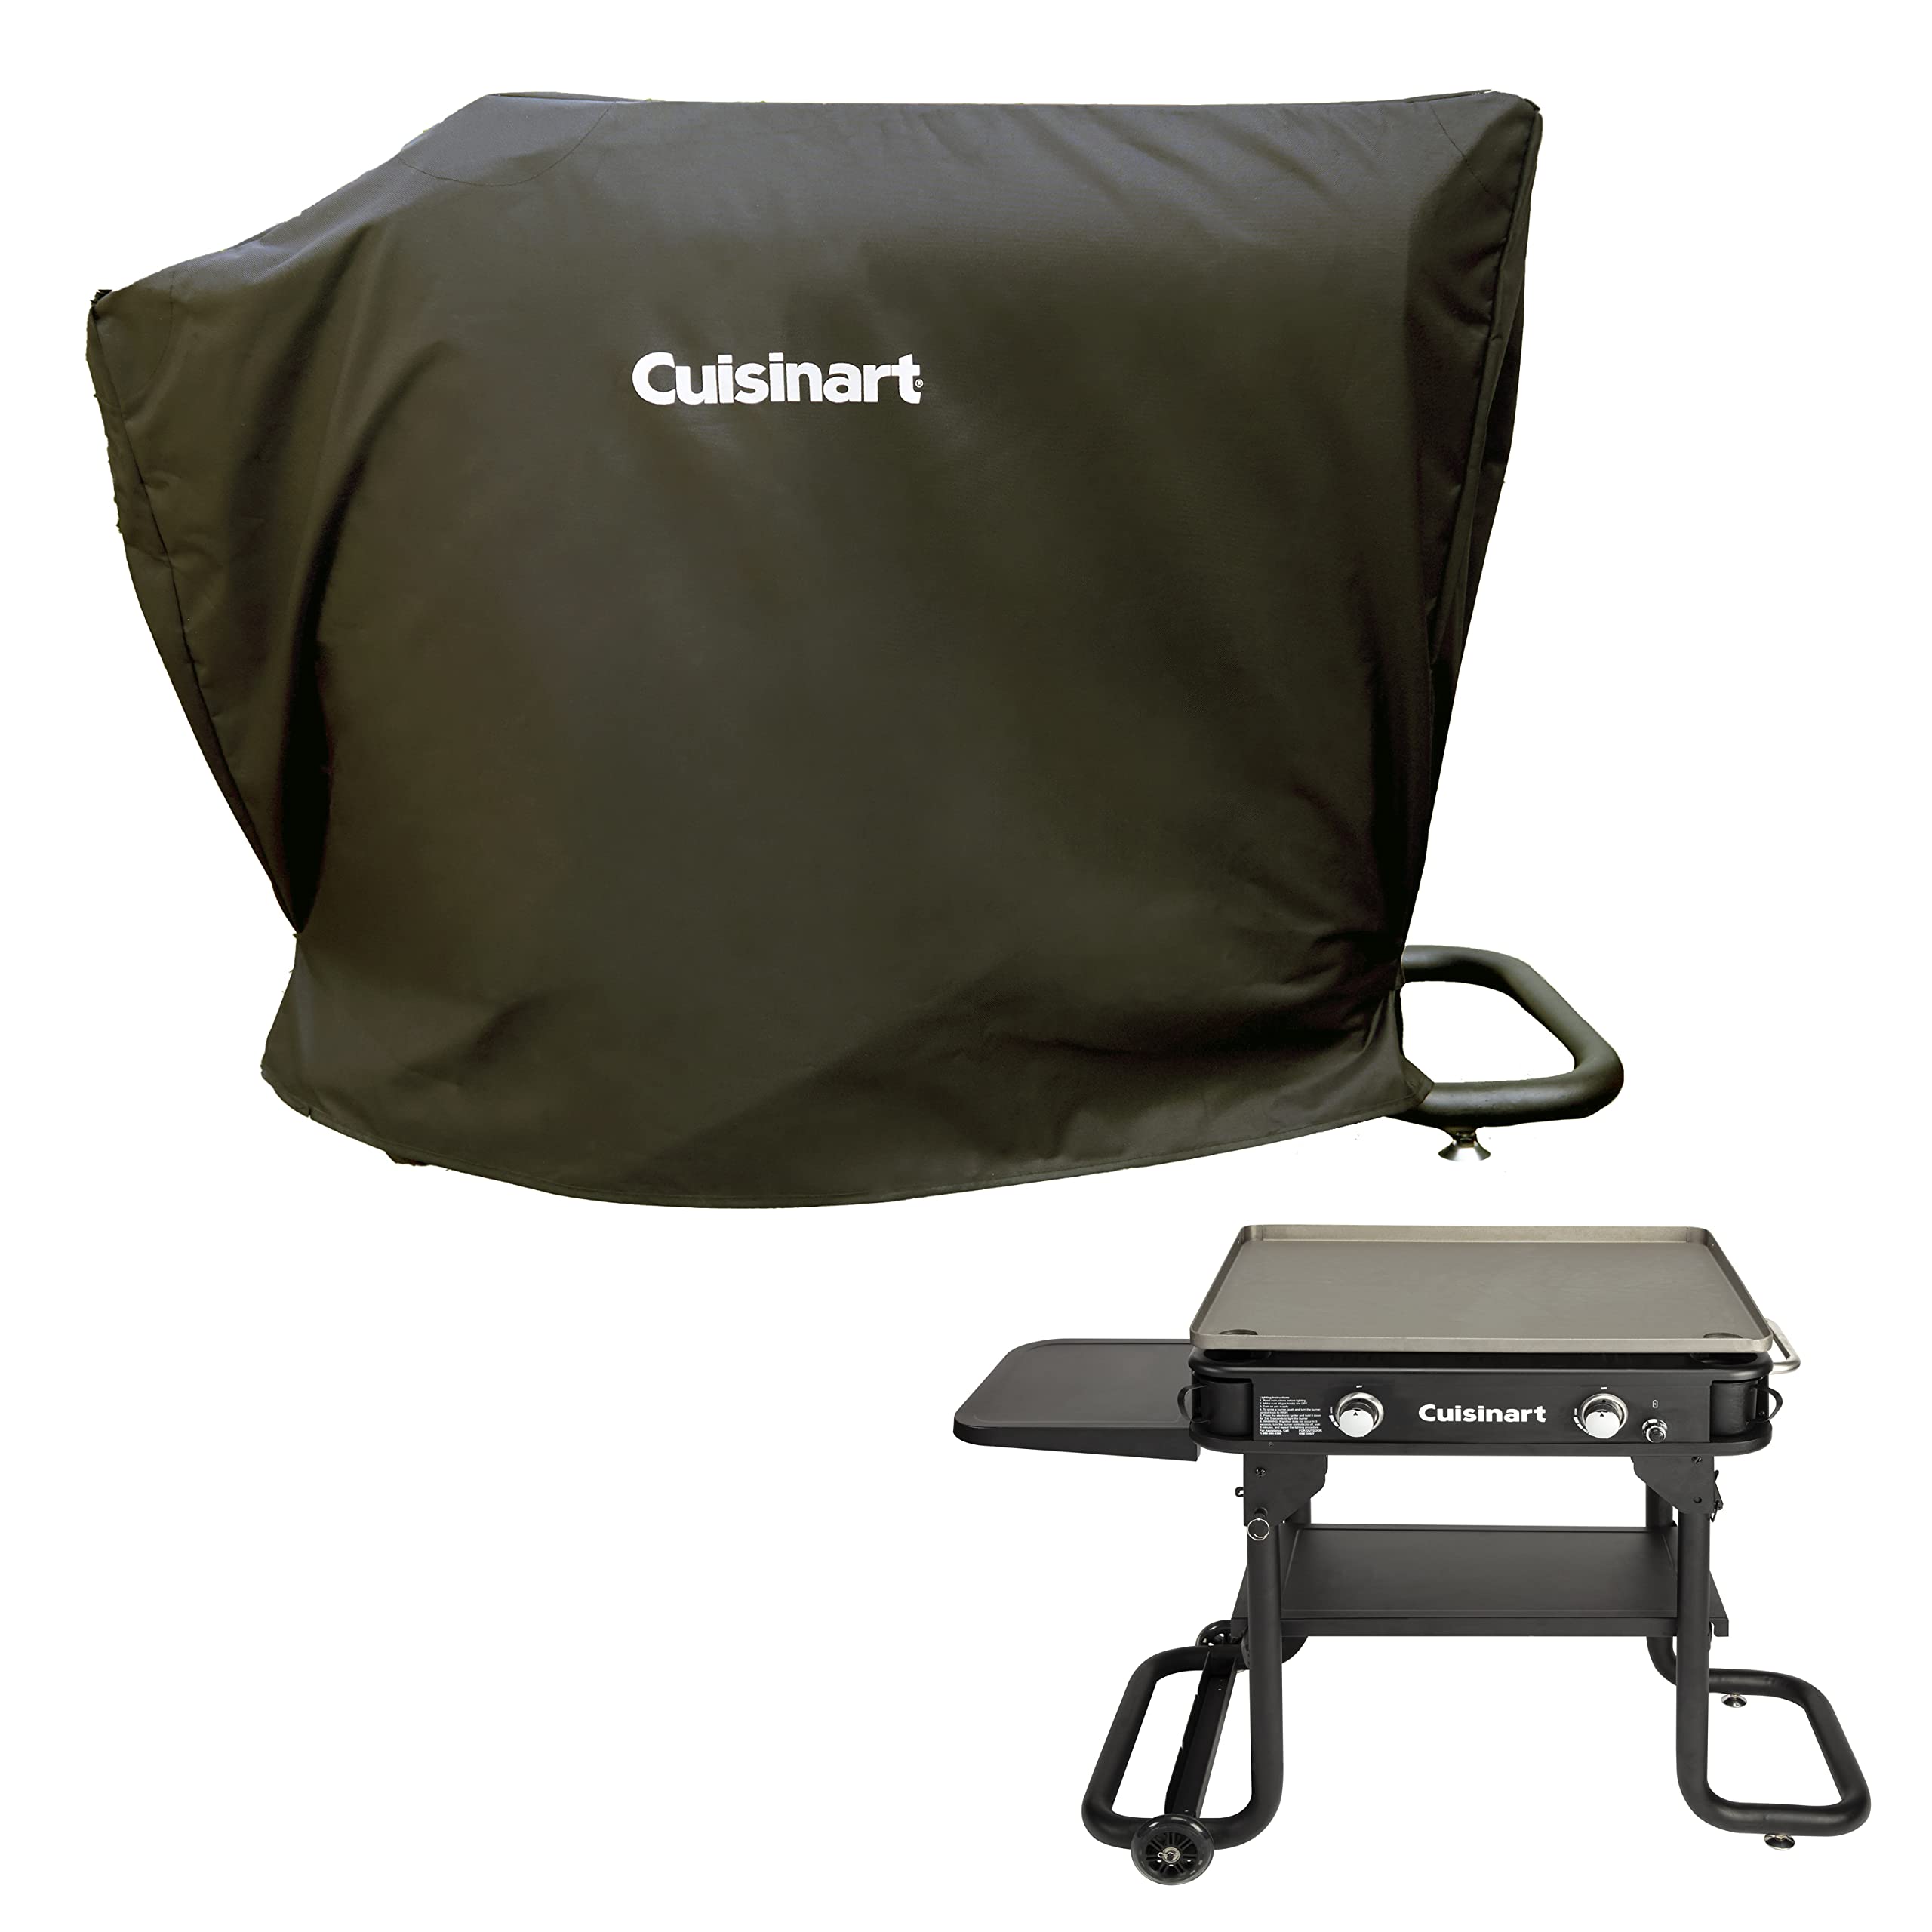 Cuisinart CGC-280 Griddle Cover, Black